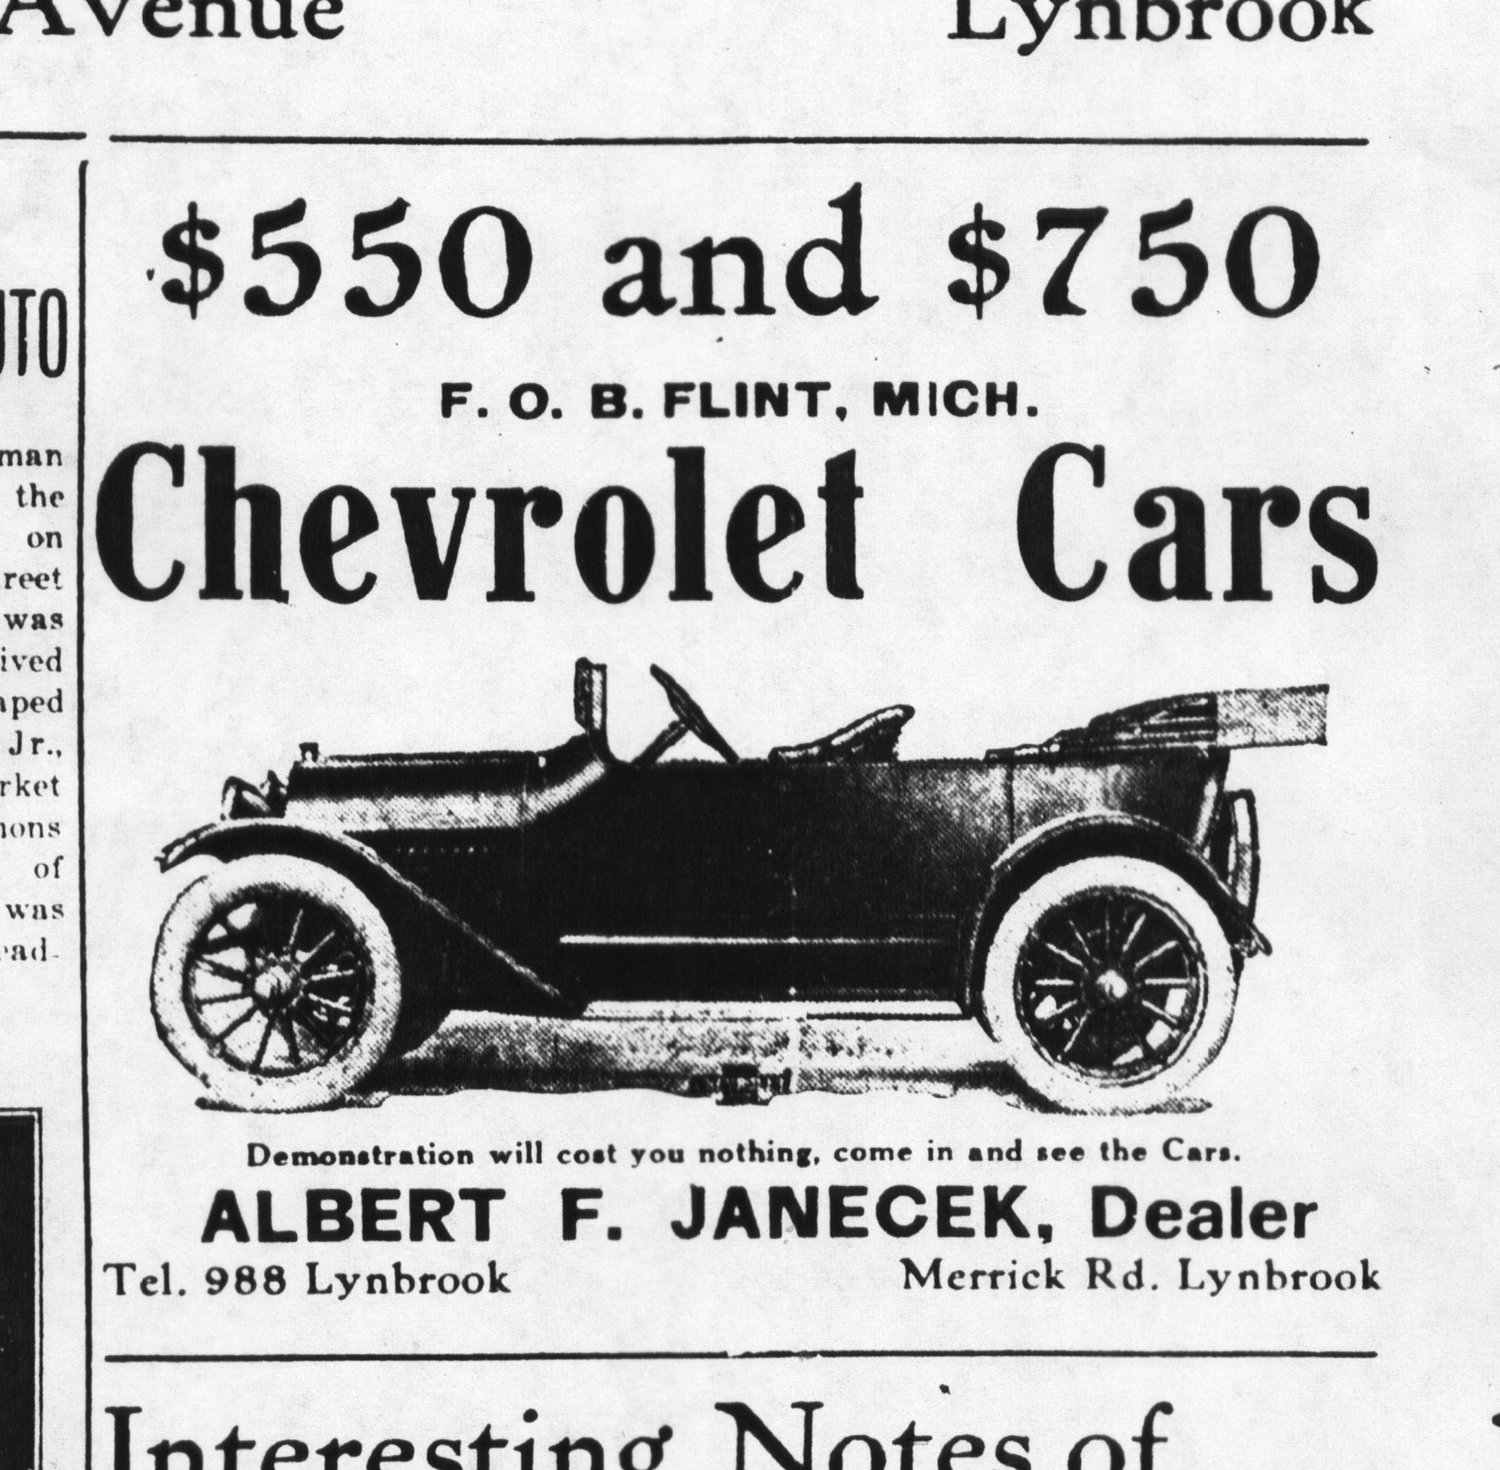 Automobile advertisement in the New Era newspaper in 1916.